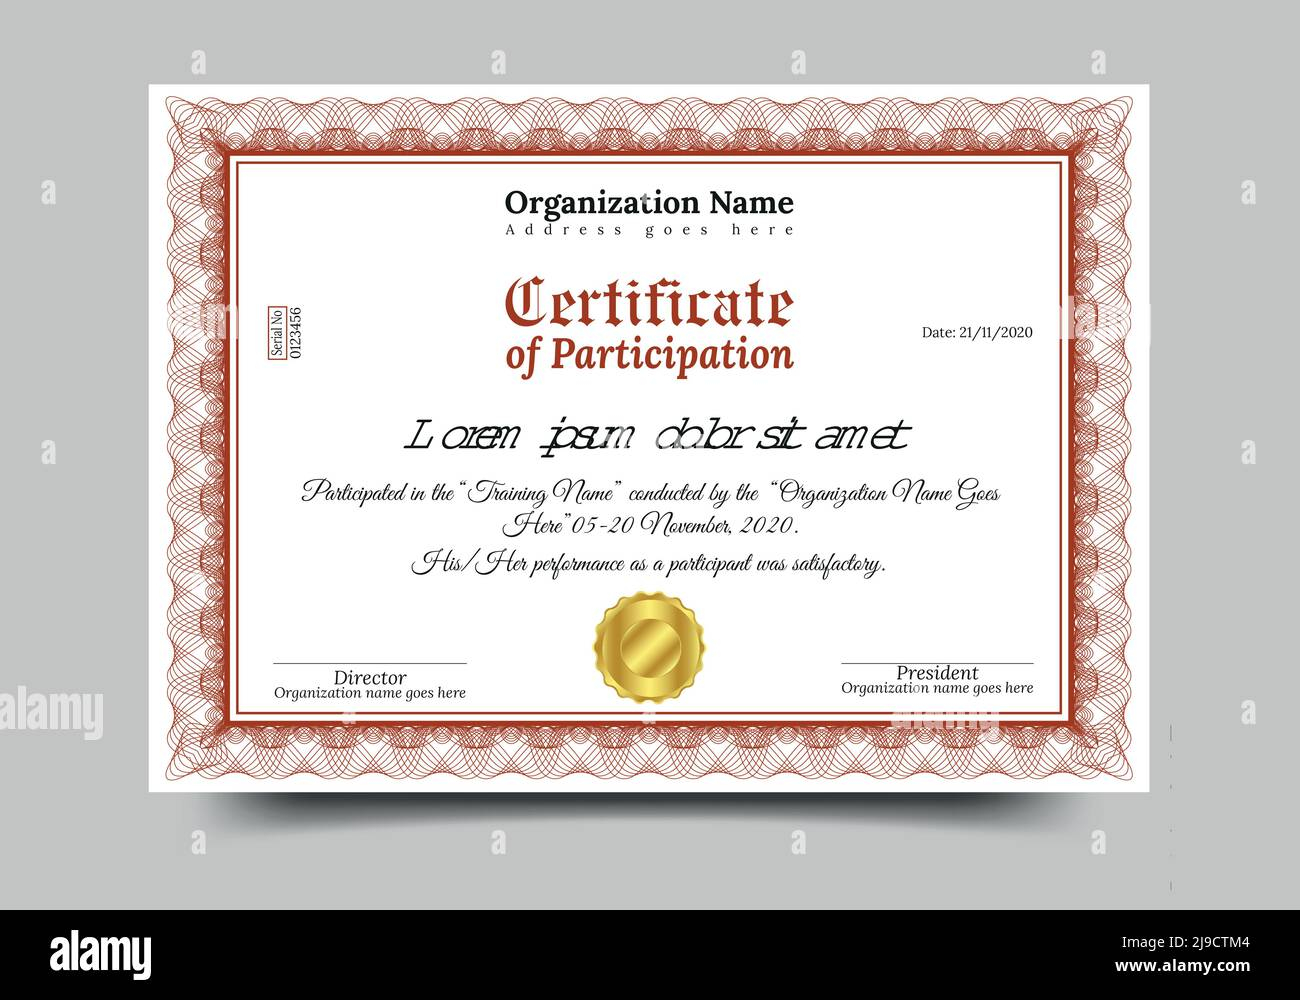 Certificate Of Participation Stock Vektorgrafiken Kaufen – Alamy Pertaining To Templates For Certificates Of Participation